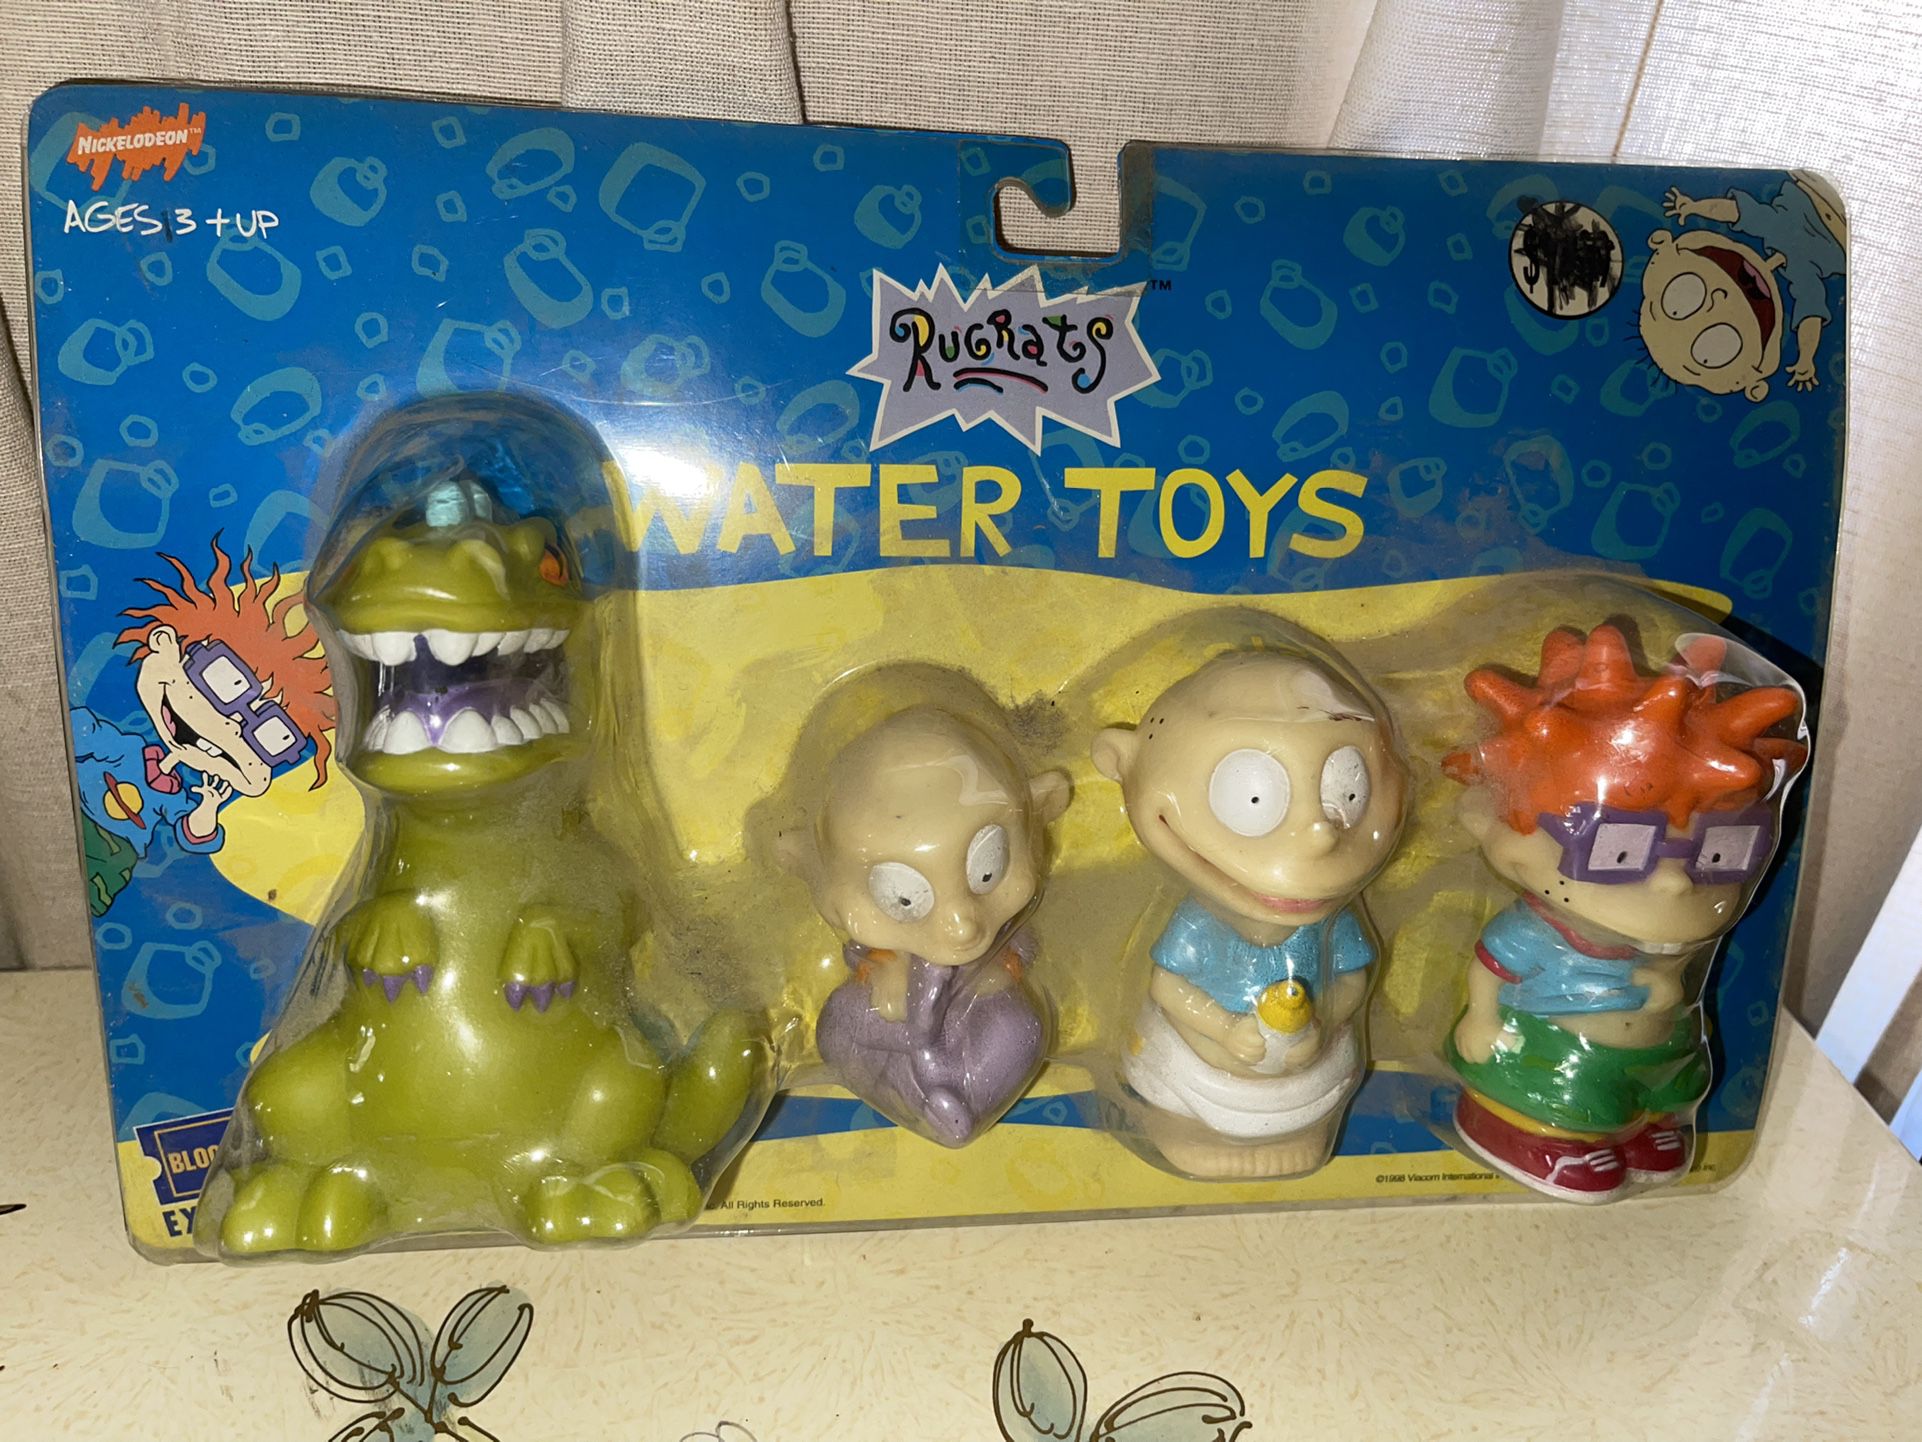 Nickelodeon Rugrats 1998 Blockbuster Exclusive Water Toys Sealed